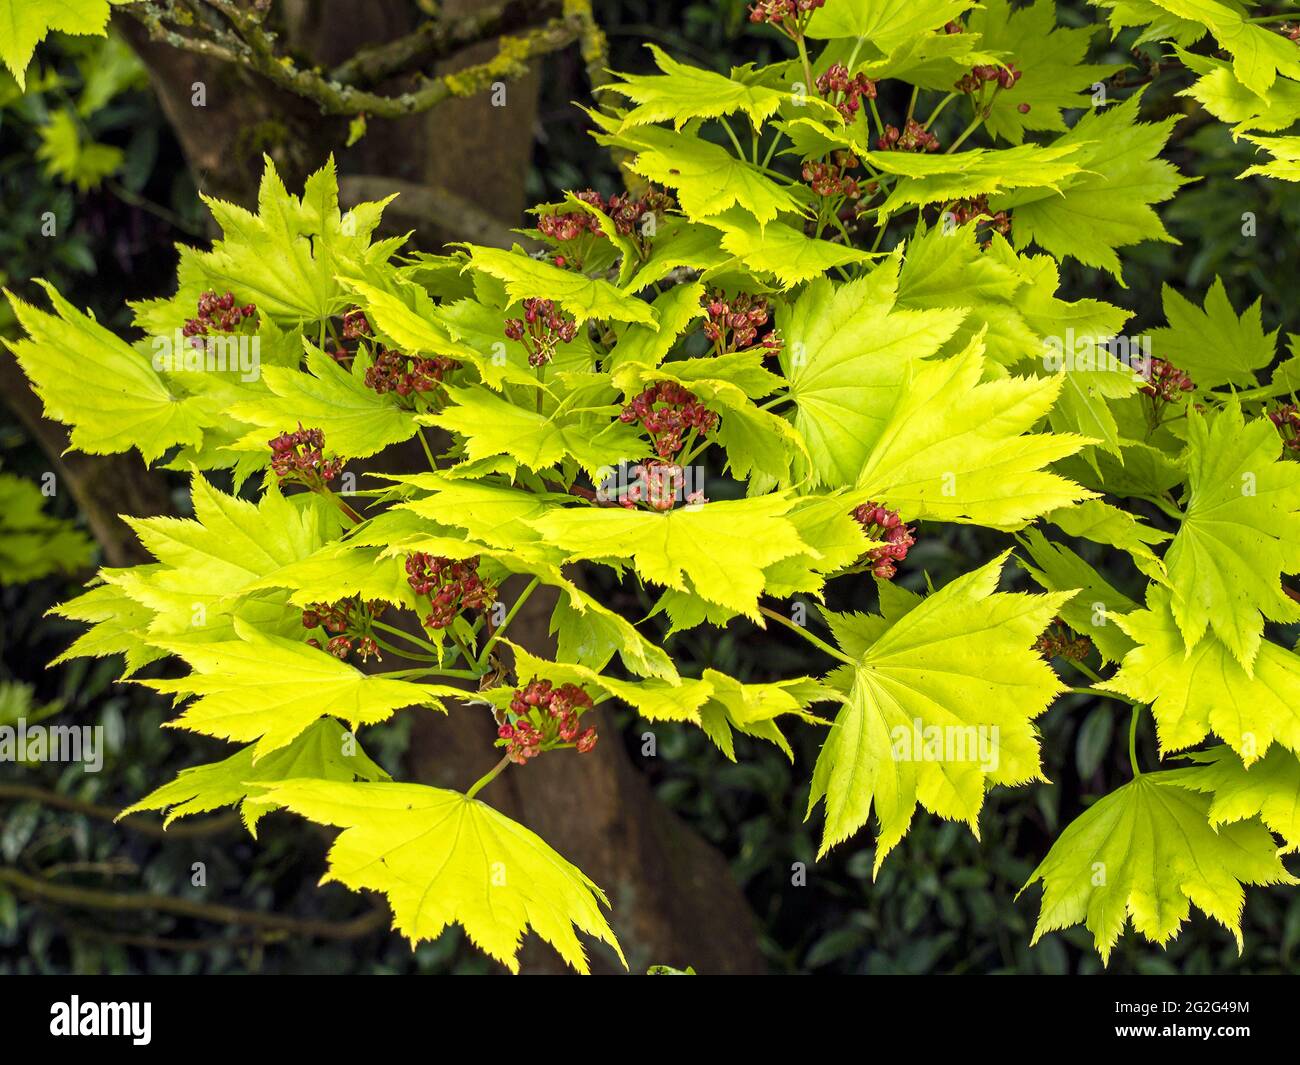 Green leaves and flowers on a full moon maple tree Stock Photo